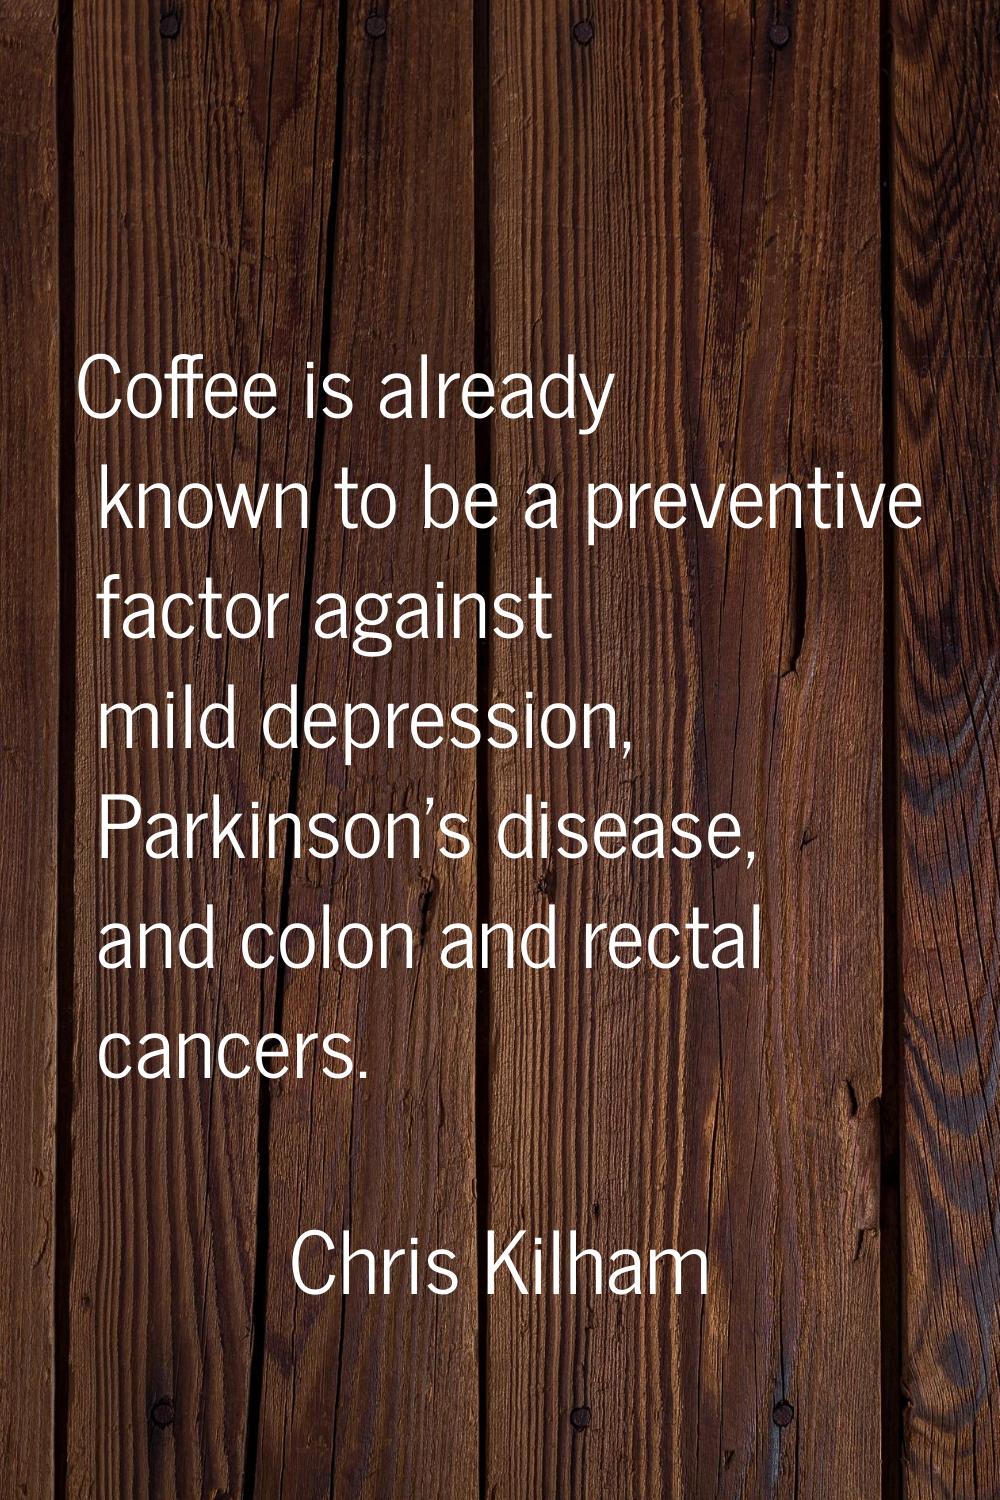 Coffee is already known to be a preventive factor against mild depression, Parkinson's disease, and